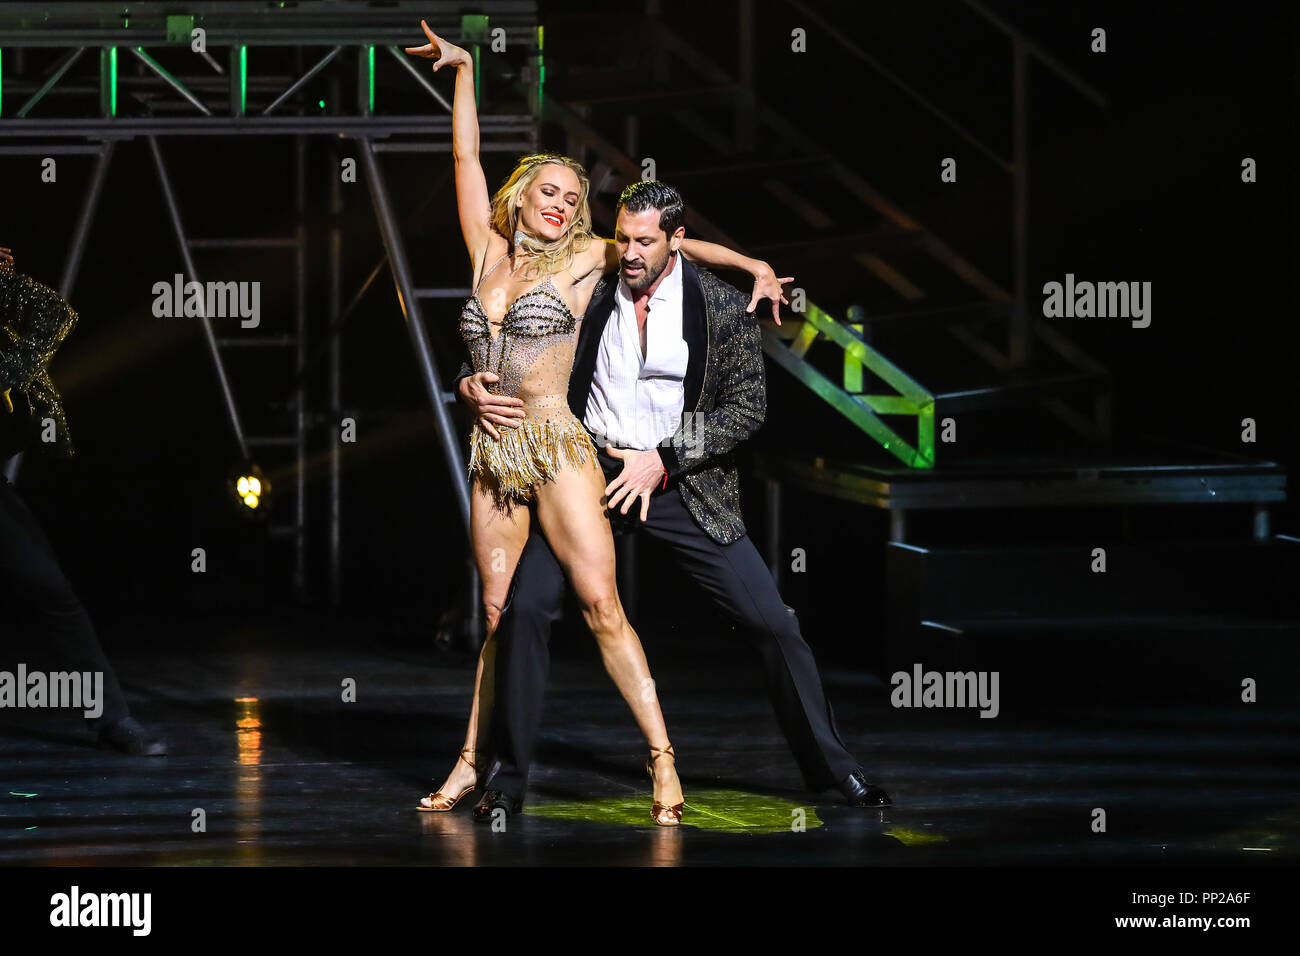 Dance Celebrities MAKS, VAL, AND PETA perform in Durham, North Carolina as part of their 2018 Confidential Tour. Maksim ''Maks'' Aleksandrovich Chmerkovskiy is a Ukrainian-America Latin-ballroom dance champion, choreographer, and instructor. Peta Jane Murgatroyd is a New Zealand-born Australian professional Latin dancer. Valentin Aleksandrovich ''Val'' Chmerkovskiy is a Ukrainian-American professional dancer, best known for his appearances on the U.S. version of Dancing with the Stars, which he won twice. Stock Photo